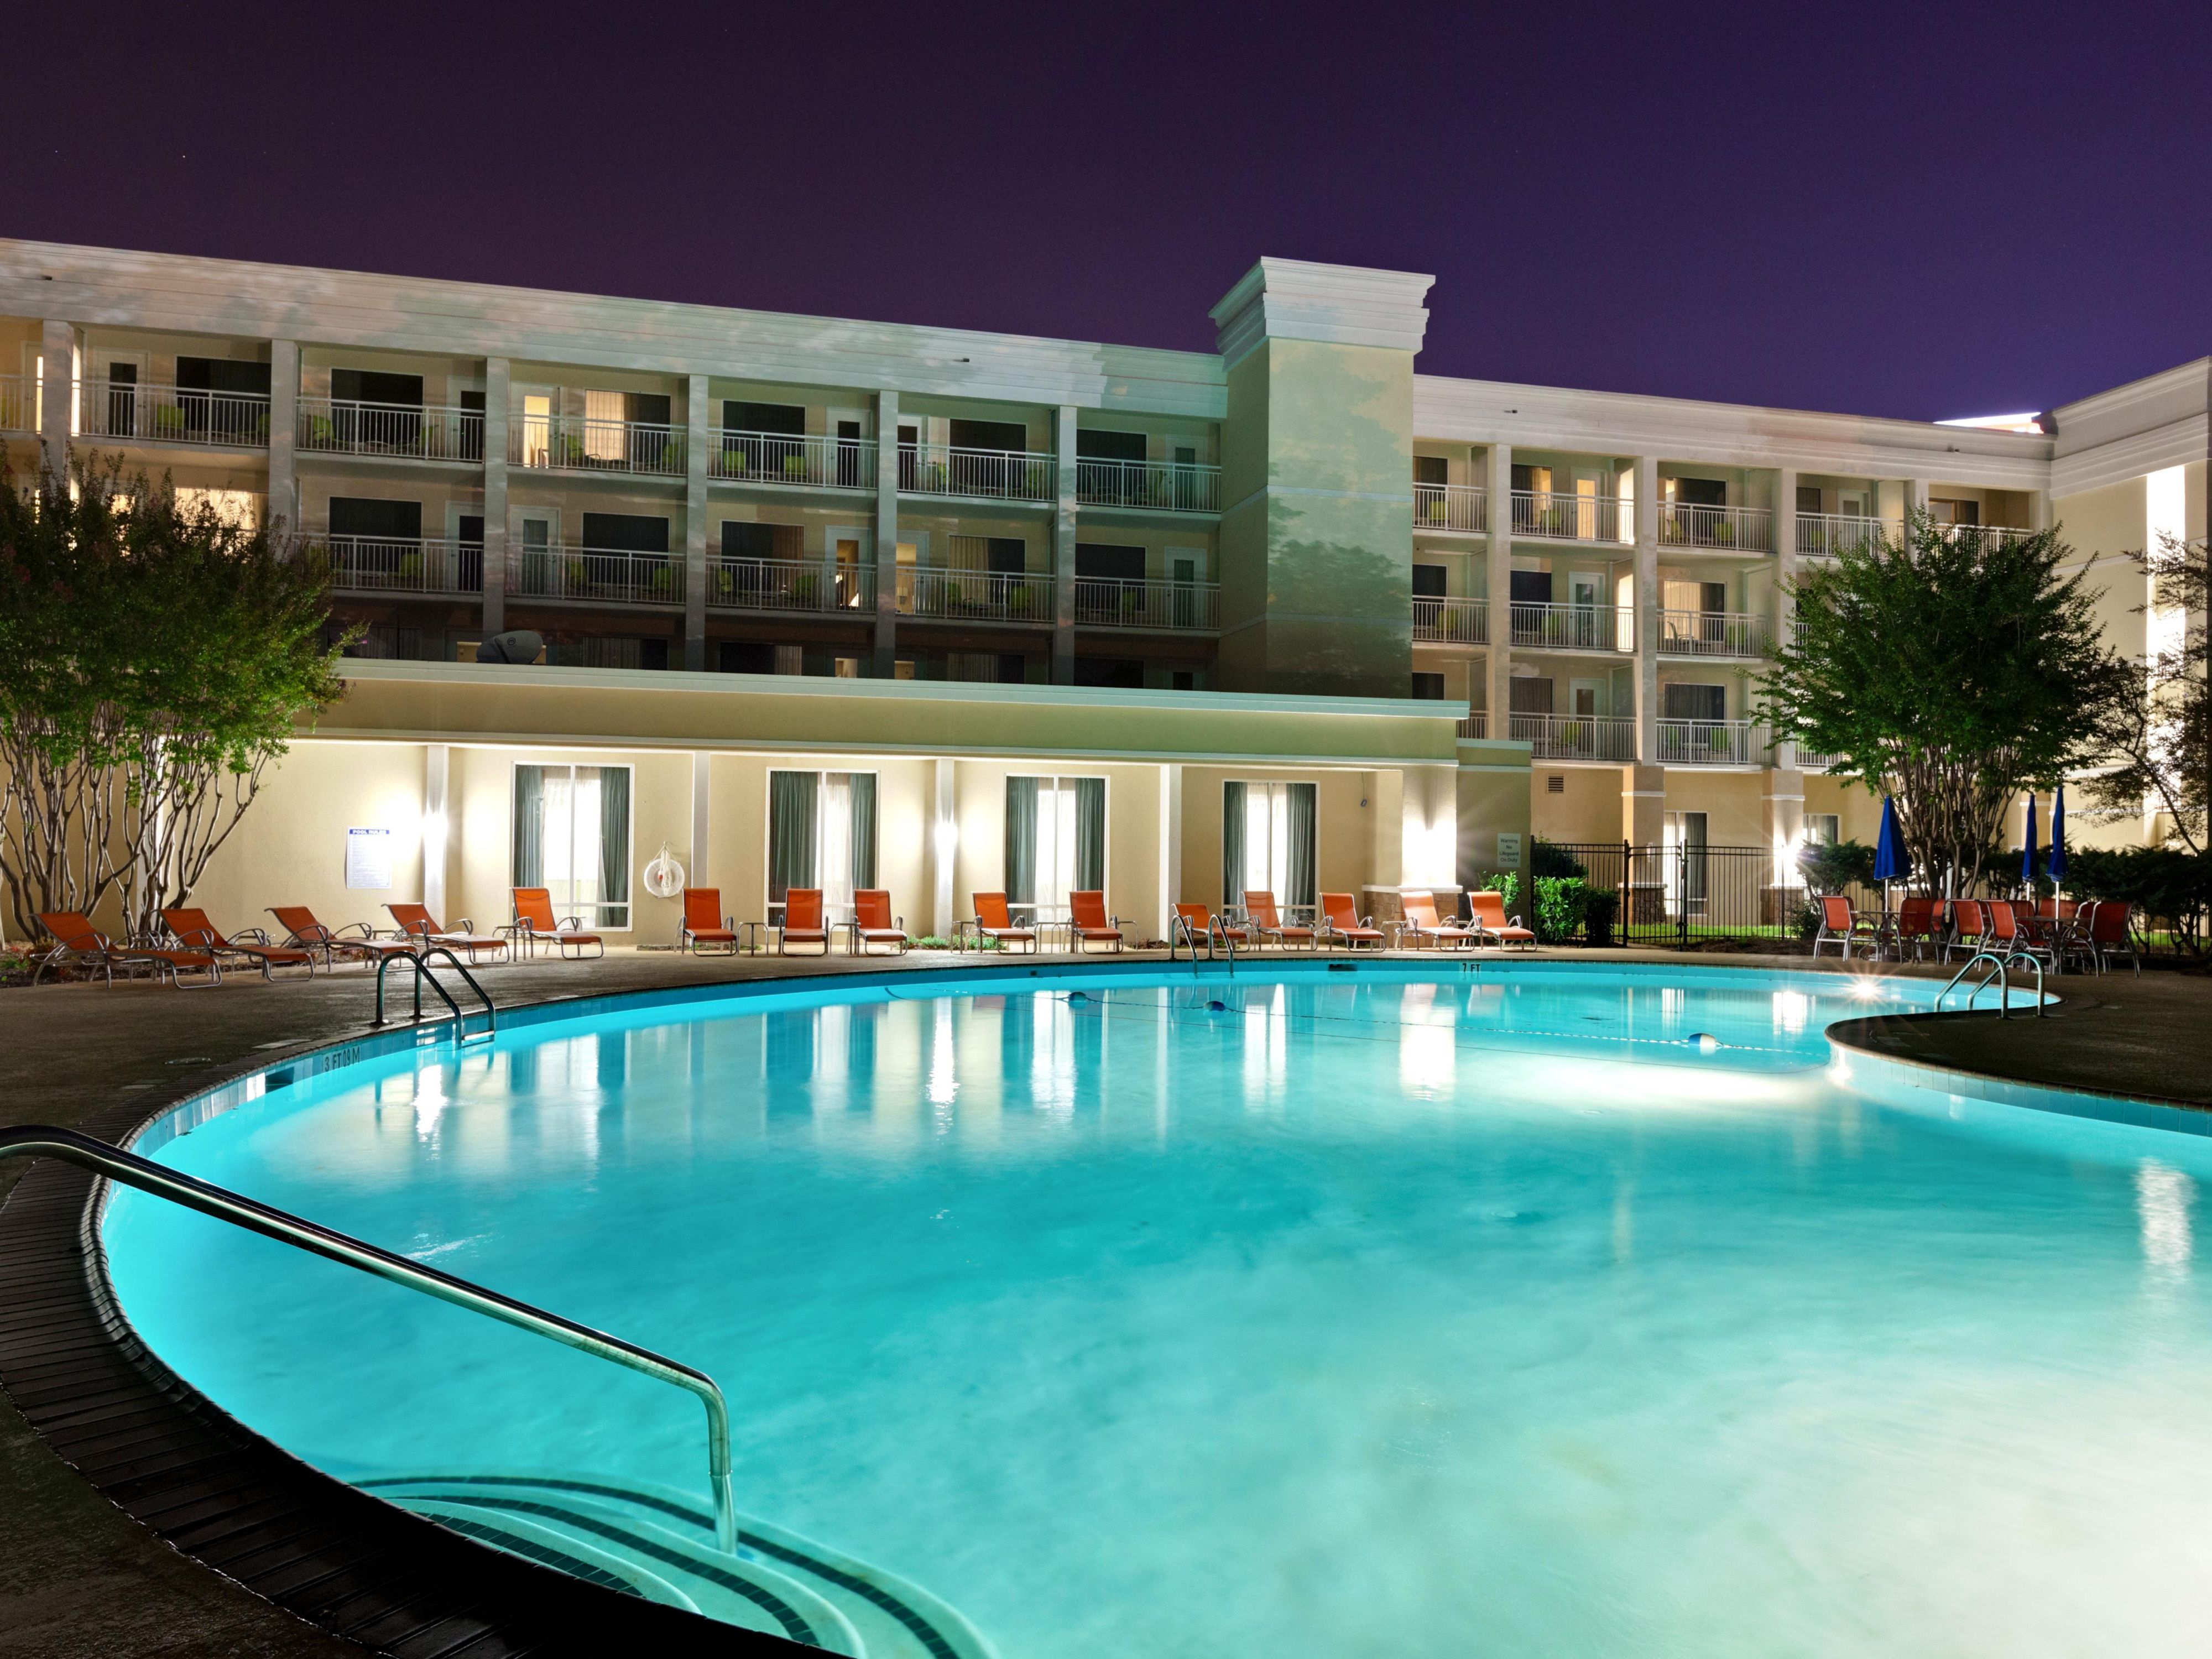 Whether you're traveling for business or pleasure, our hotel near the airport is a great choice. Our amenities include a seasonal outdoor pool, a 24-hour fitness center, as well as on-site dining options from which to choose.